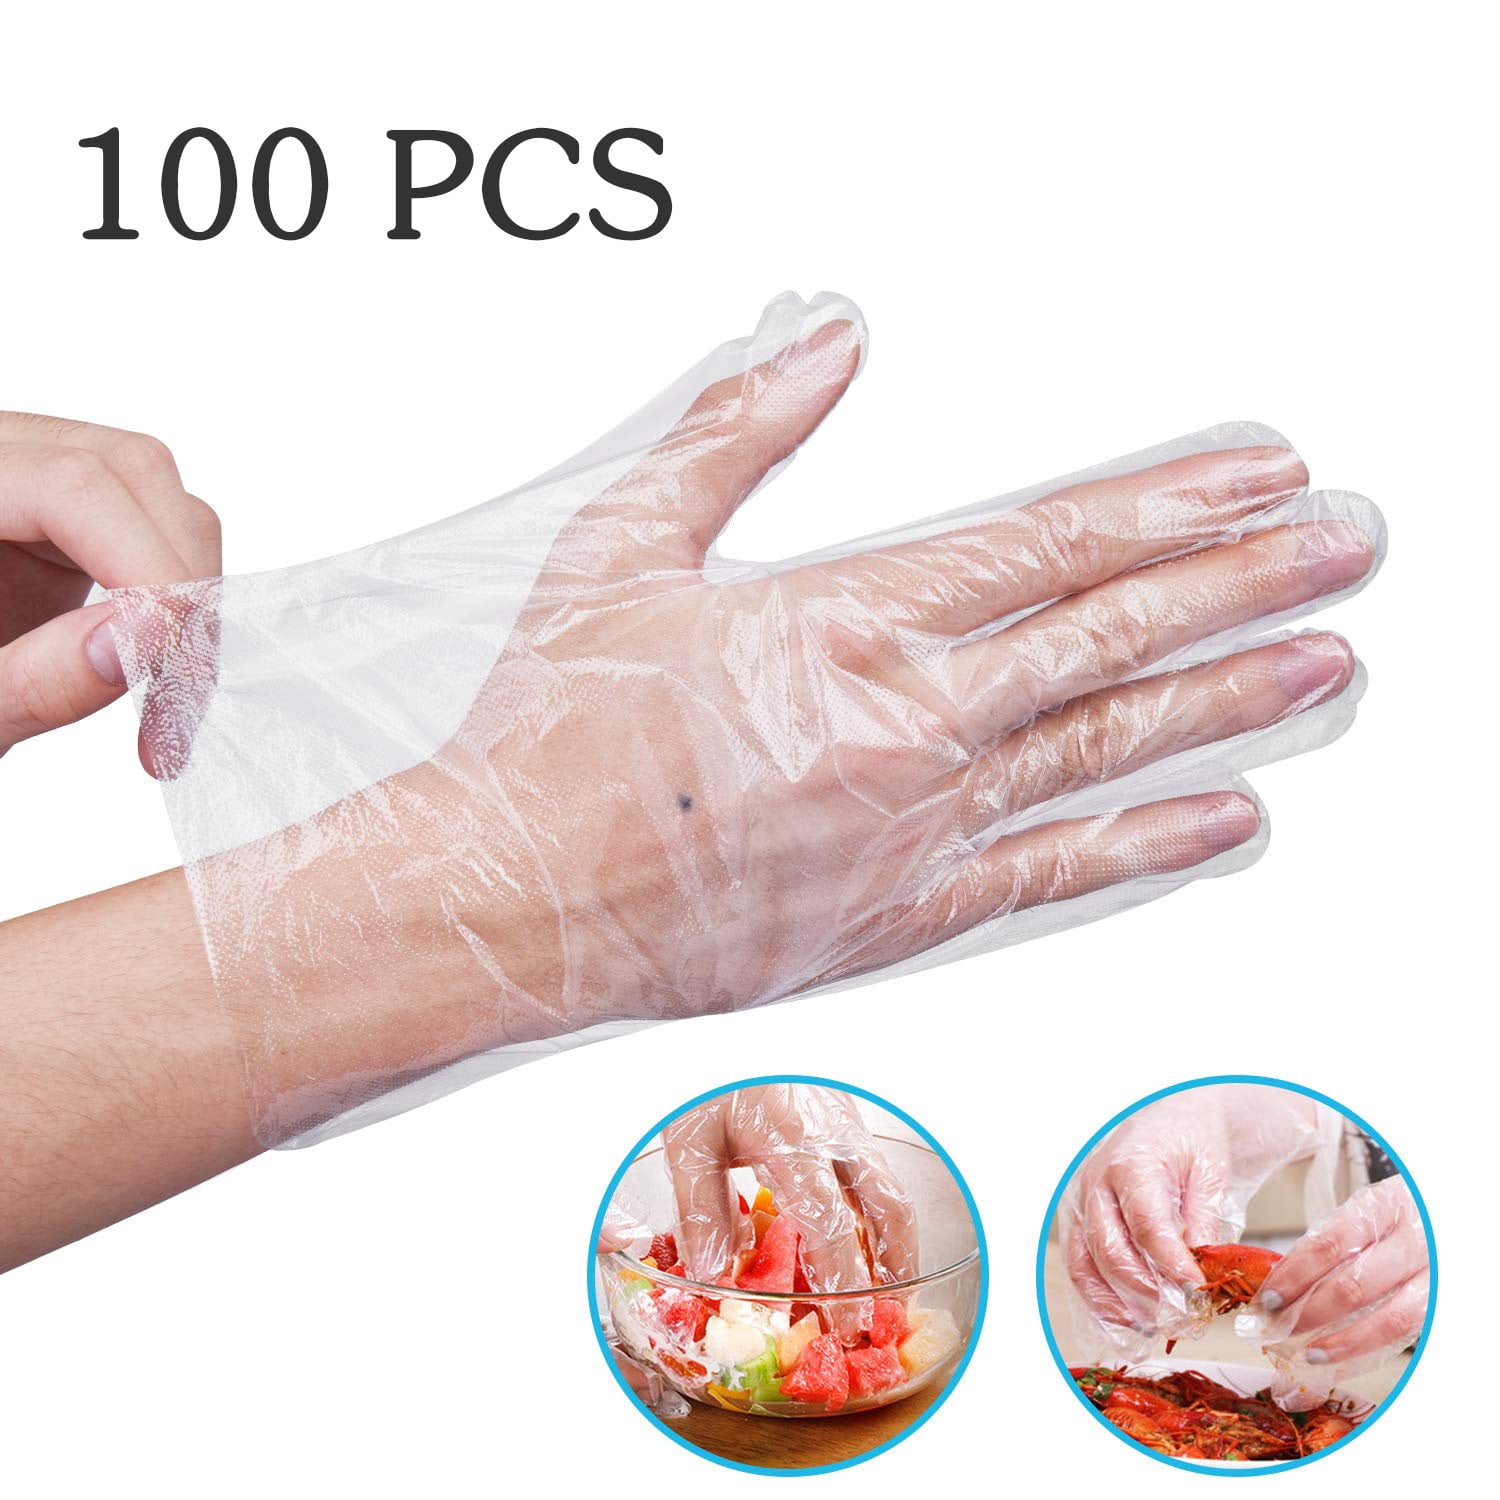 100 Pcs Plastic Disposable Gloves for Kitchen Cooking Cleaning Spa Hair Salon 